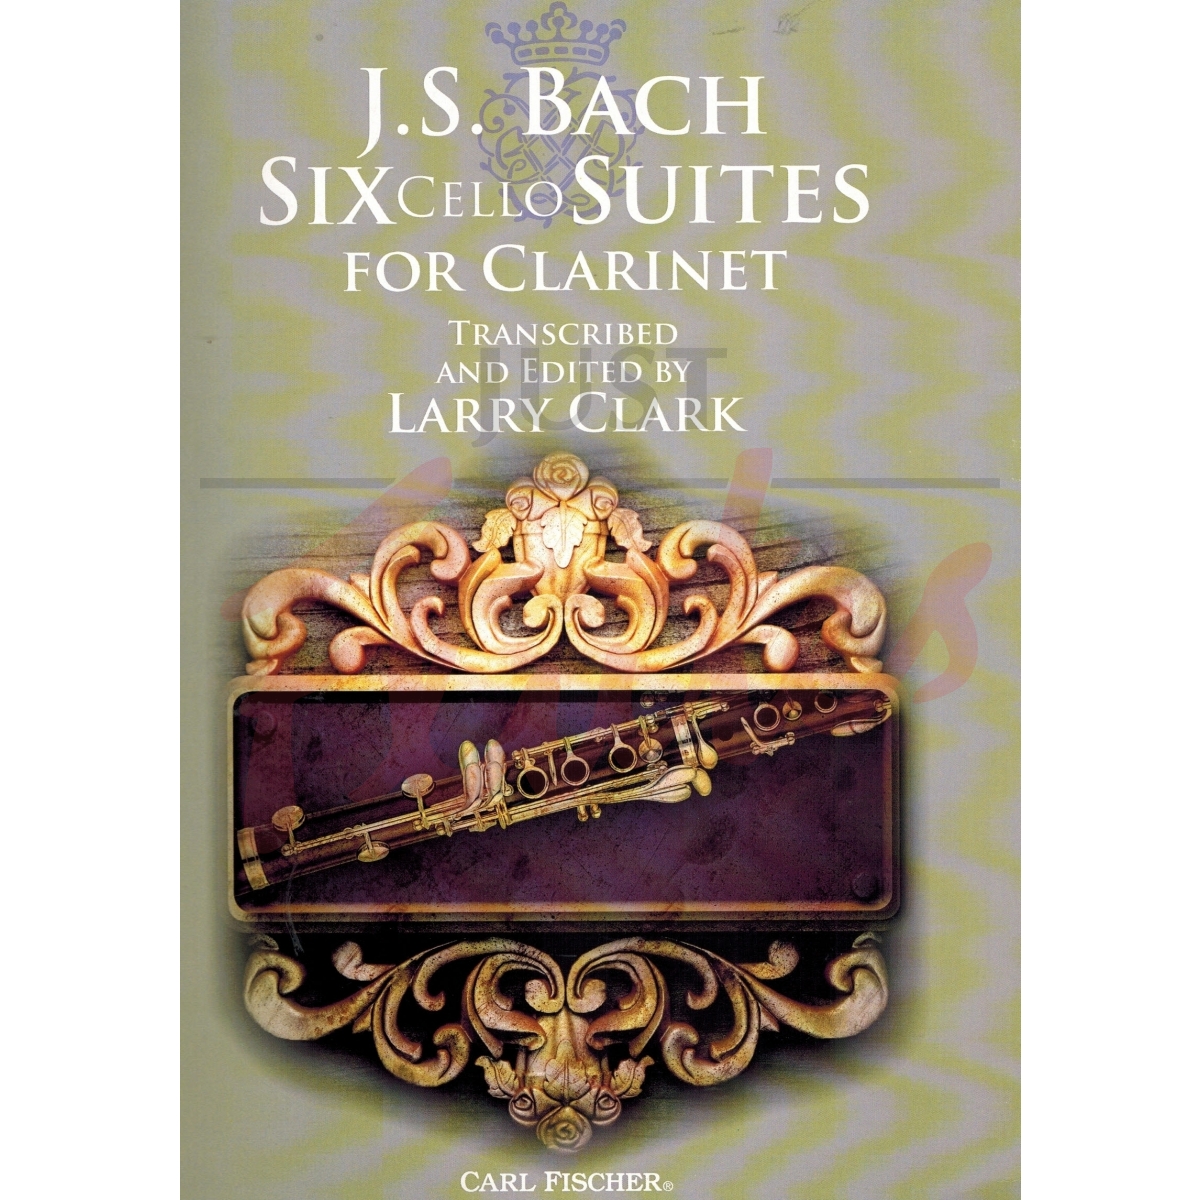 Six Cello Suites for Clarinet